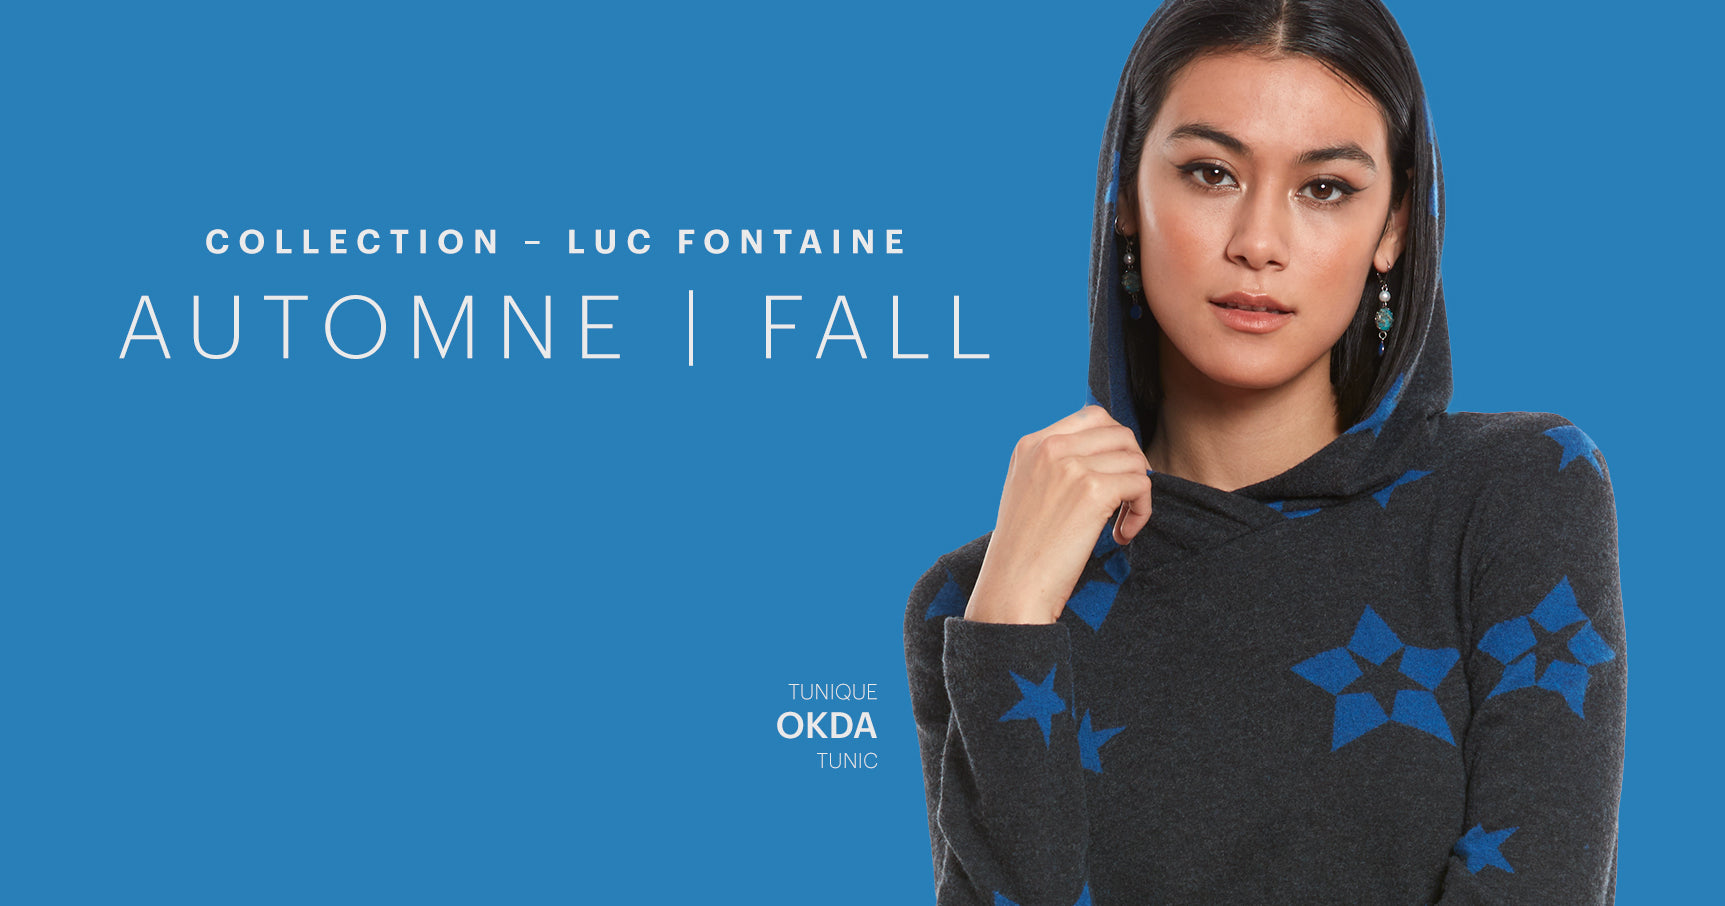 Collection Luc Fontaine - Fall - Automne